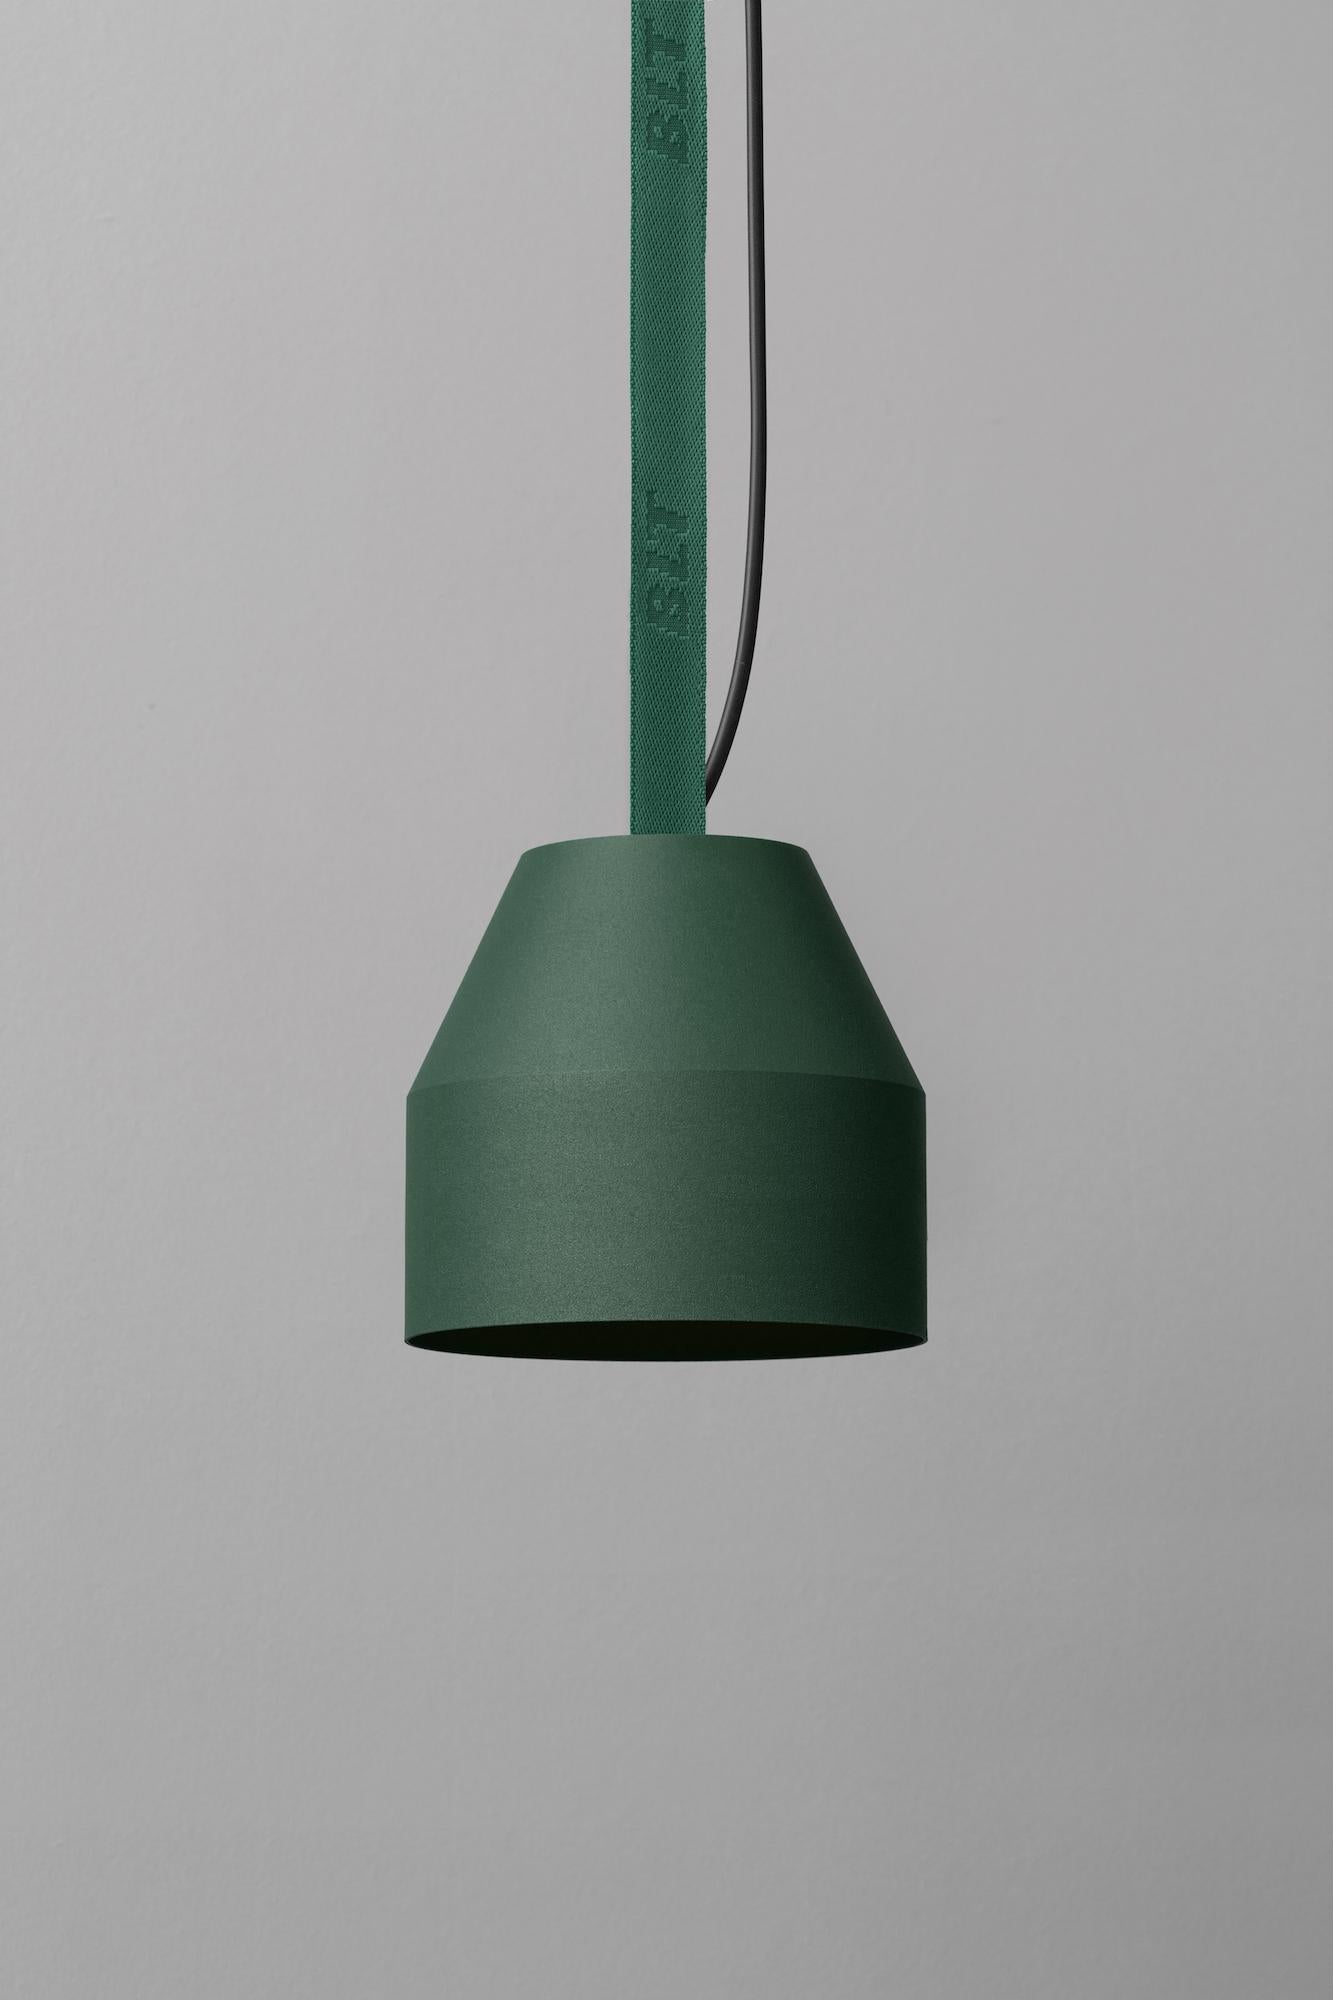 BLT_CAP Big Forest Pendant Lamp by +kouple
Dimensions: Ø 16 x H 16,5 cm. 
Materials: Powder-coated steel and textile.

Available in different color options. The rod length is 250 cm. Please contact us.

All our lamps can be wired according to each